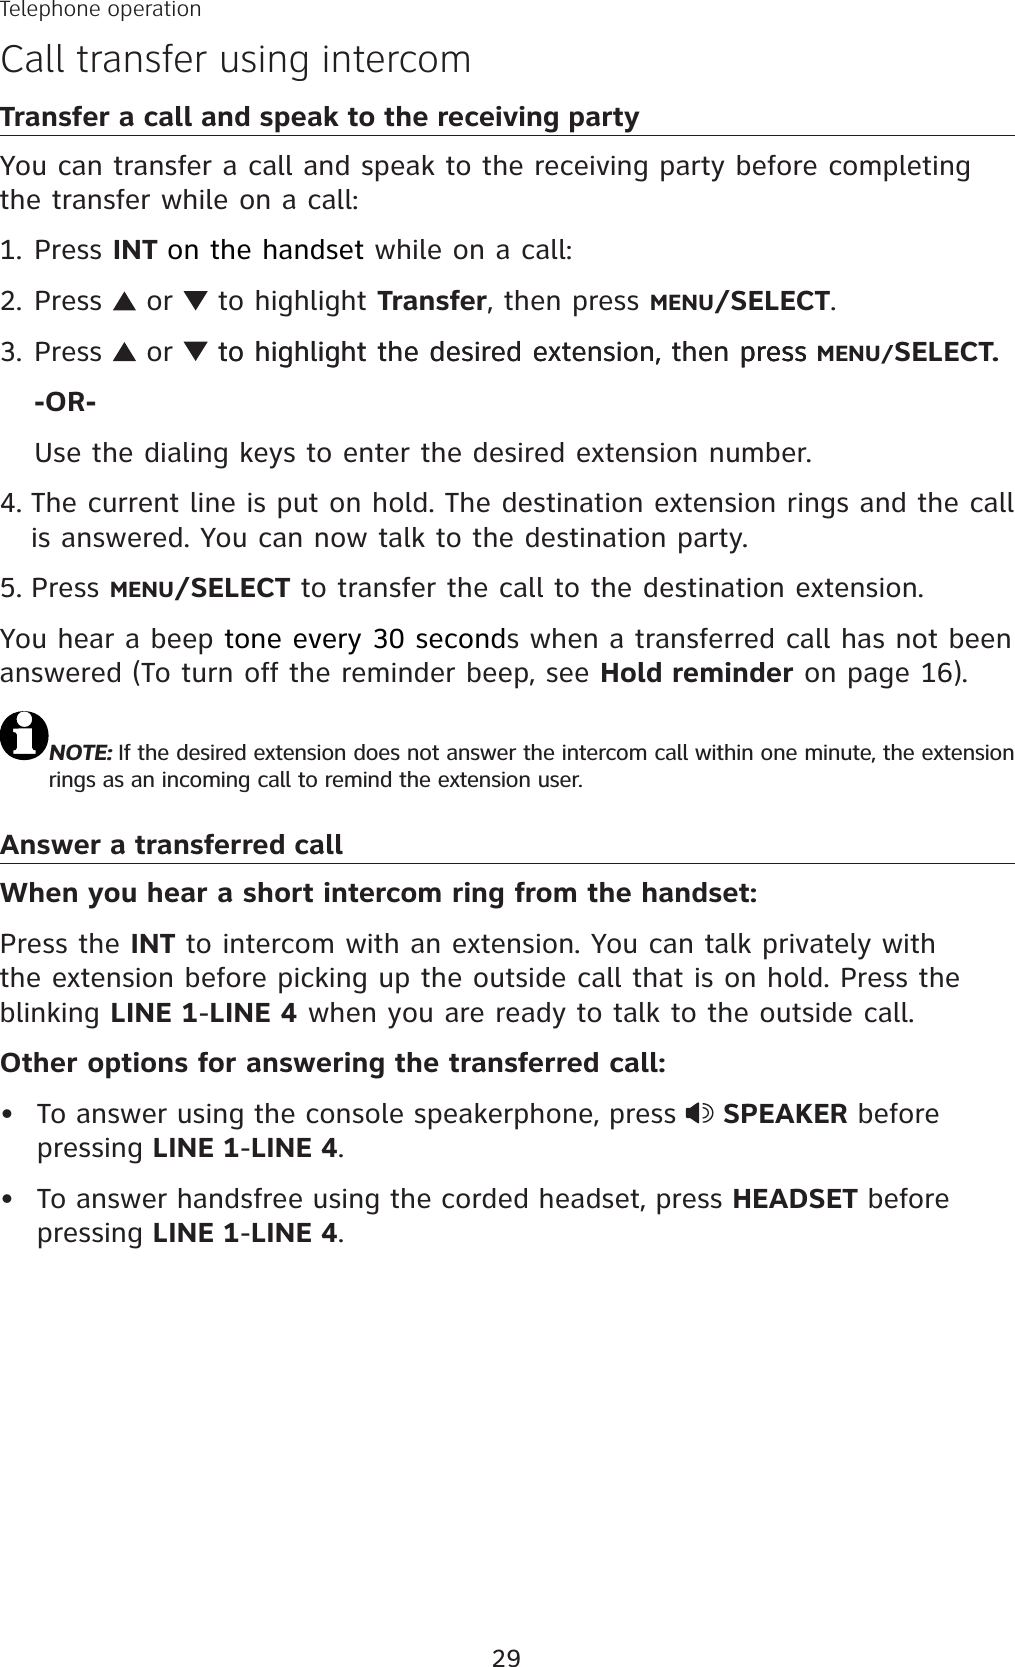 29Transfer a call and speak to the receiving partyYou can transfer a call and speak to the receiving party before completing the transfer while on a call:Press INT on the handset while on a call:Press   or   to highlight Transfer, then press MENU/SELECT.Press   or  to highlight the desired extension, then pressto highlight the desired extension, then press press MENU/SELECT.-OR-Use the dialing keys to enter the desired extension number.The current line is put on hold. The destination extension rings and the call is answered. You can now talk to the destination party. Press MENU/SELECT to transfer the call to the destination extension.You hear a beep tone every 30 seconds when a transferred call has not been answered (To turn off the reminder beep, see Hold reminder on page 16).NOTE: If the desired extension does not answer the intercom call within one minute, the extension rings as an incoming call to remind the extension user. Answer a transferred callWhen you hear a short intercom ring from the handset:Press the INT to intercom with an extension. You can talk privately with the extension before picking up the outside call that is on hold. Press the blinking LINE 1-LINE 4 when you are ready to talk to the outside call. Other options for answering the transferred call:To answer using the console speakerphone, press  SPEAKER before pressing LINE 1-LINE 4.To answer handsfree using the corded headset, press HEADSET before pressing LINE 1-LINE 4.1.2.3.4.5.••Telephone operationCall transfer using intercom